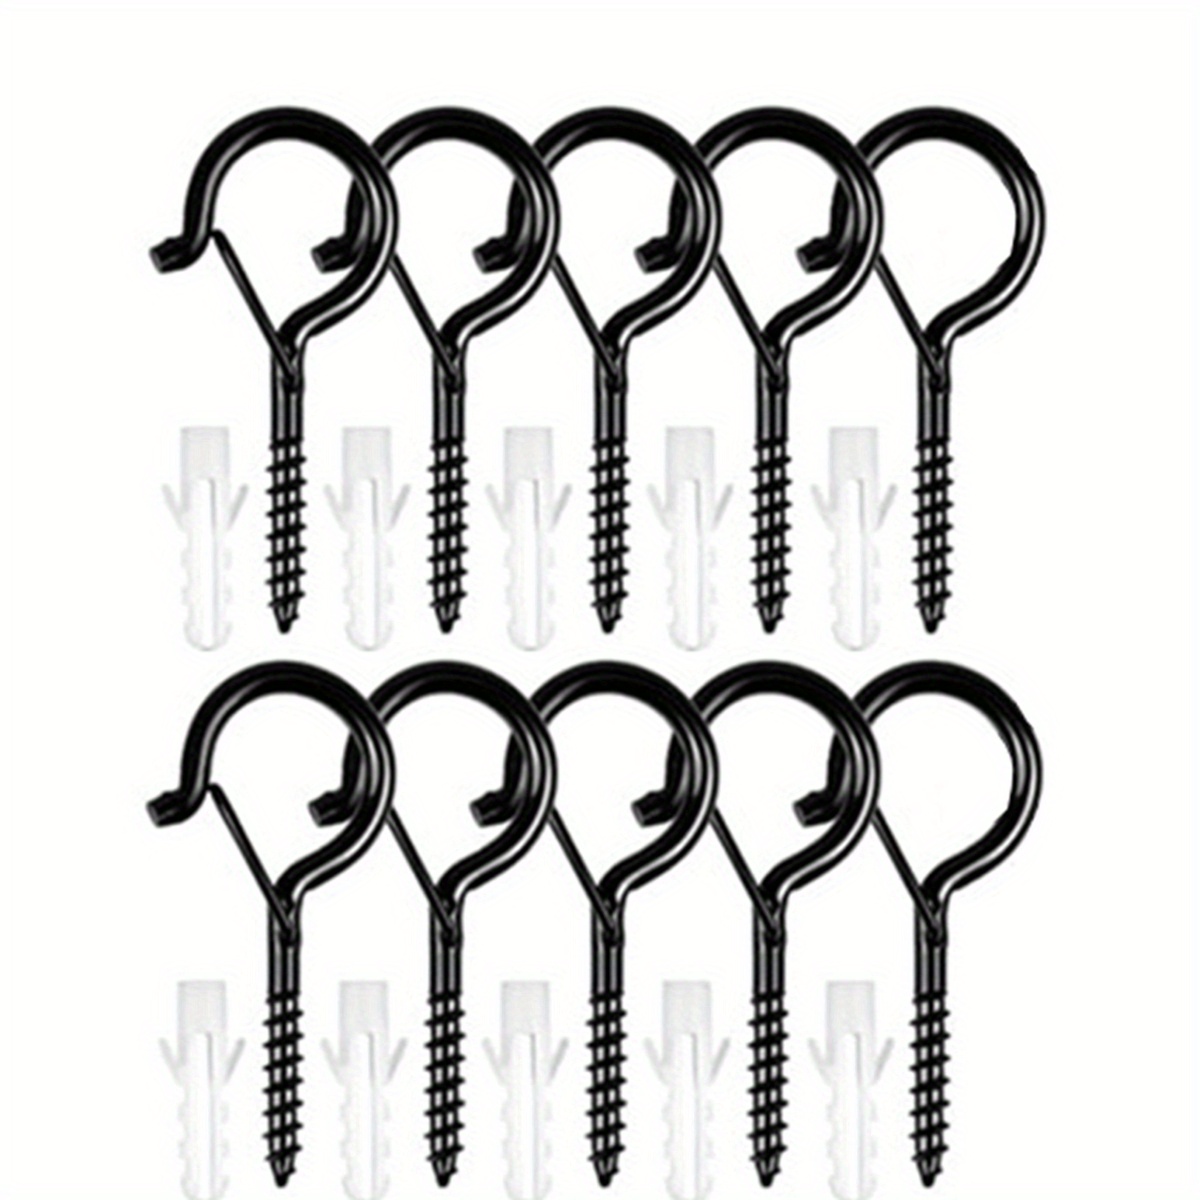 20 PCS 3 inches Q-Hanger Hooks with Safety Buckle, Screw Hooks for Outdoor  String Lights, Ceiling Hooks for Hanging Plants, Black